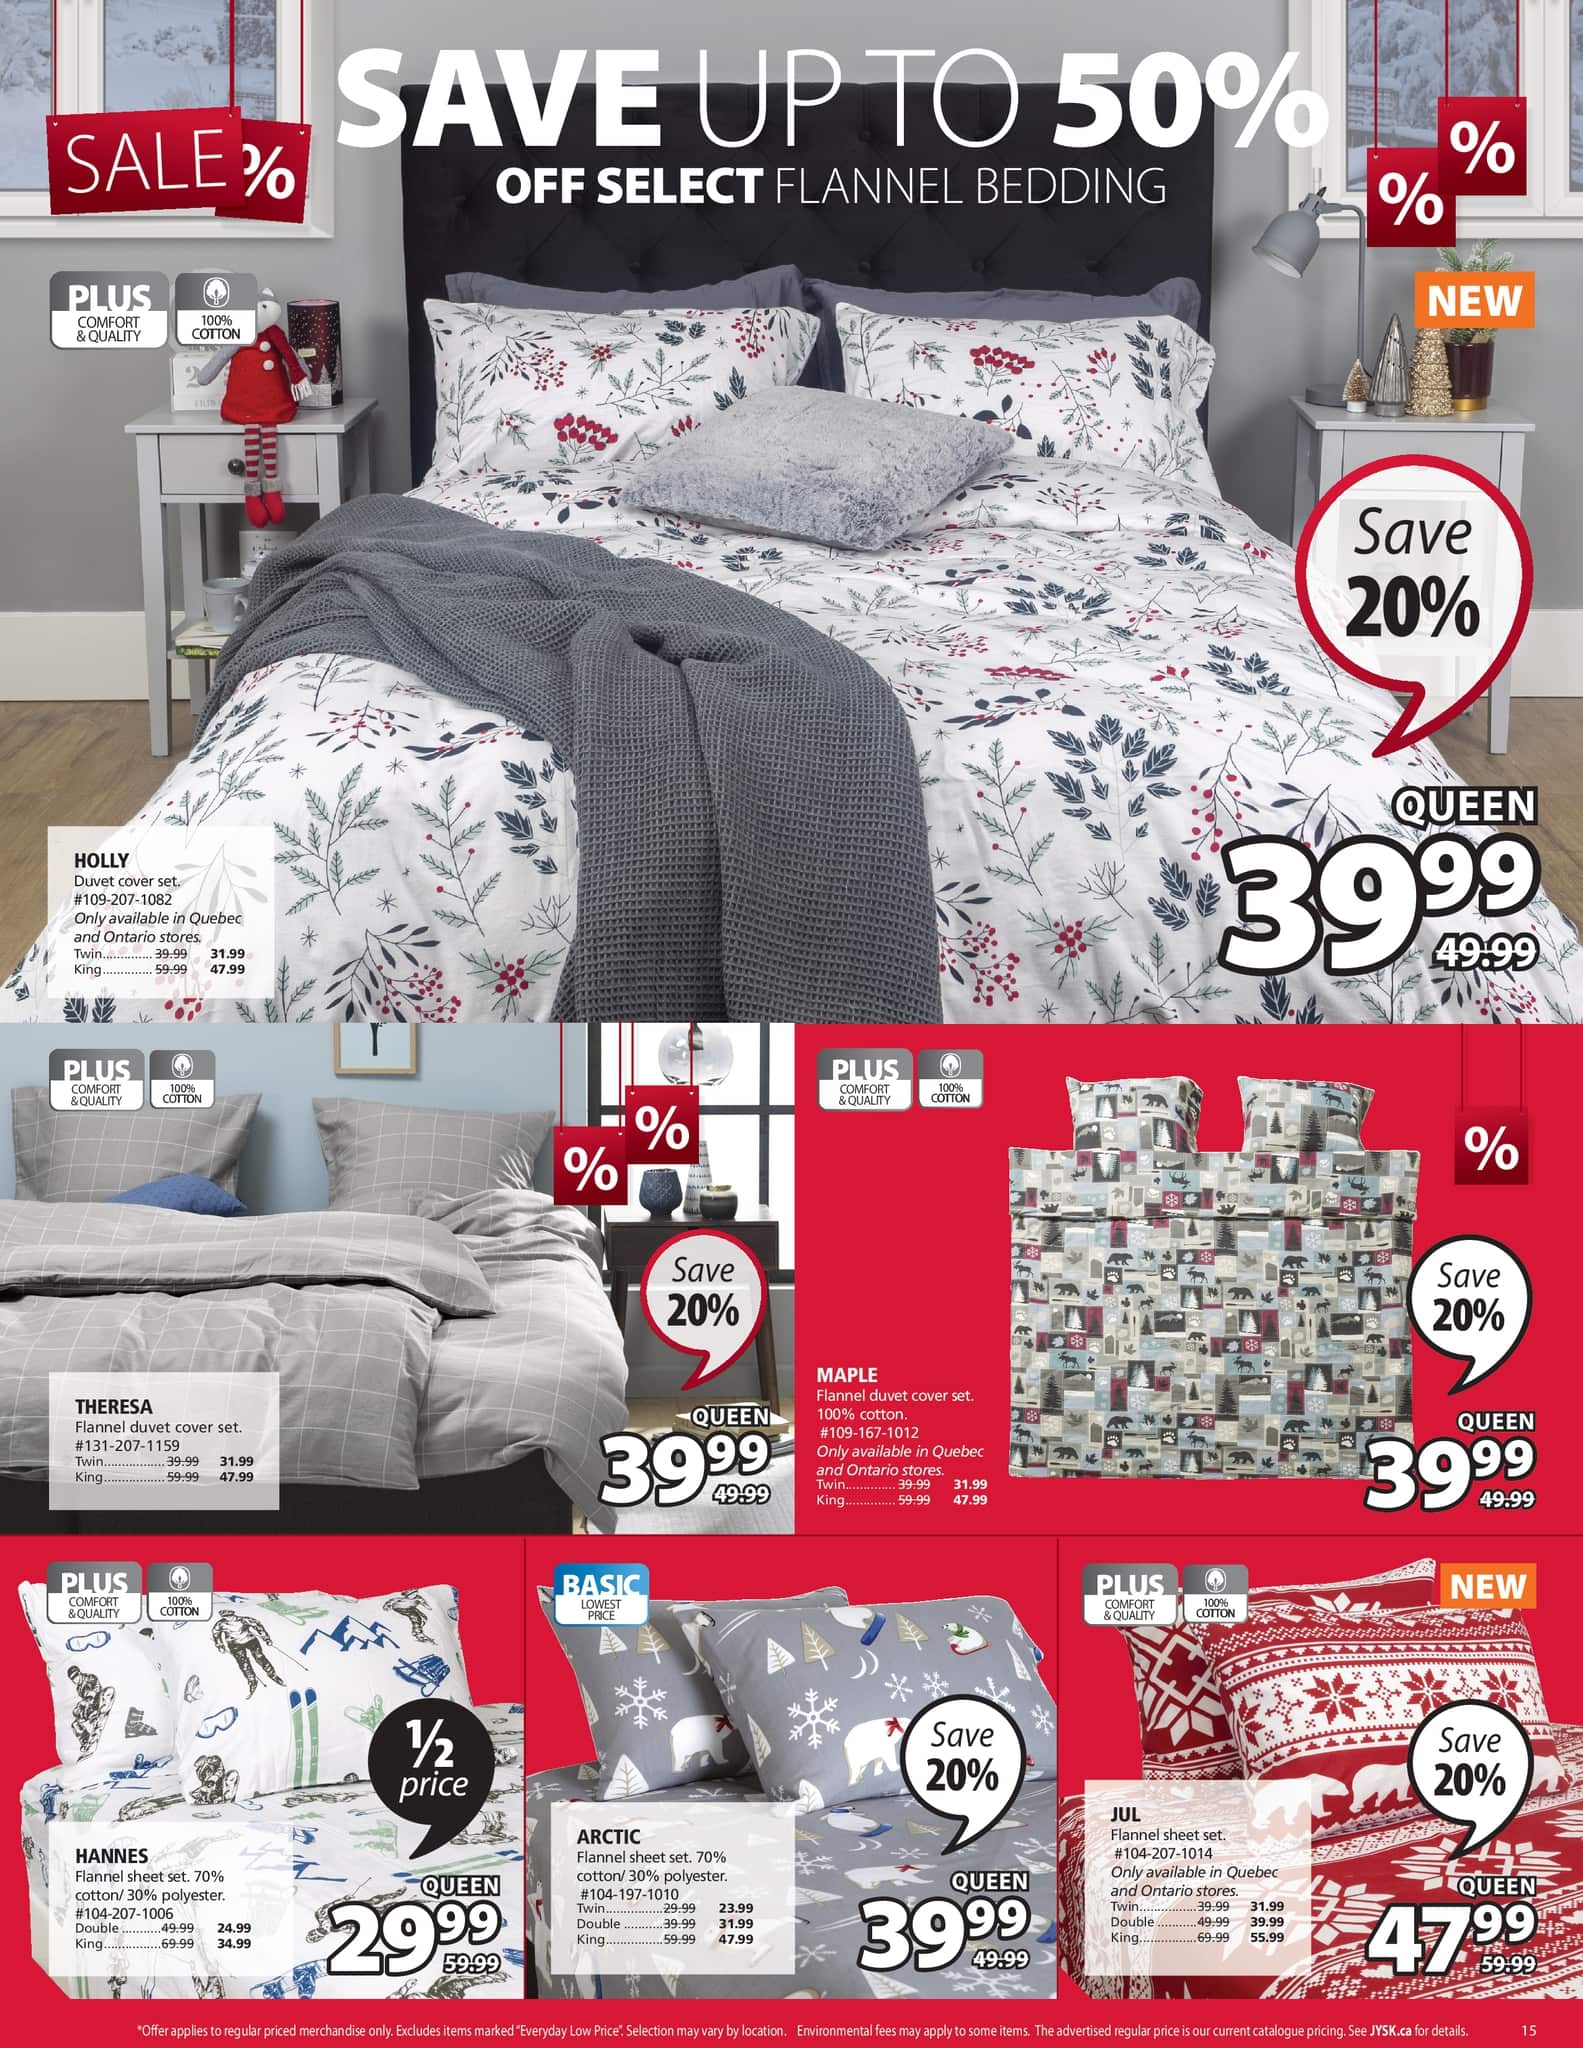 Jysk - Weekly Flyer Specials - Page 15